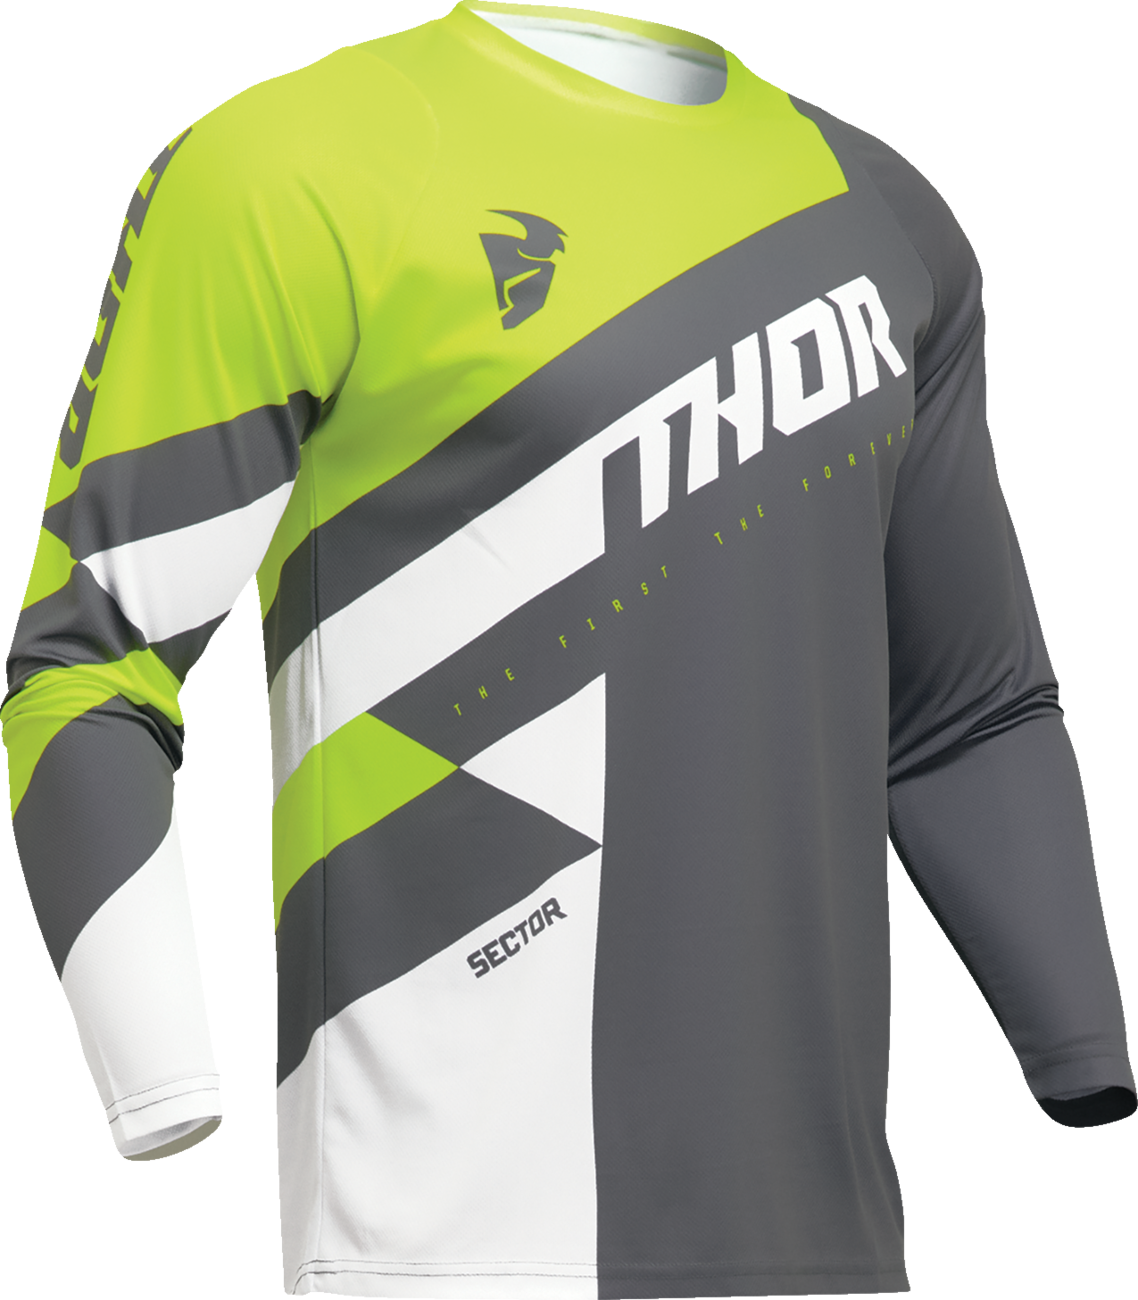 THOR Youth Sector Checker Jersey - Gray/Green - Large 2912-2422